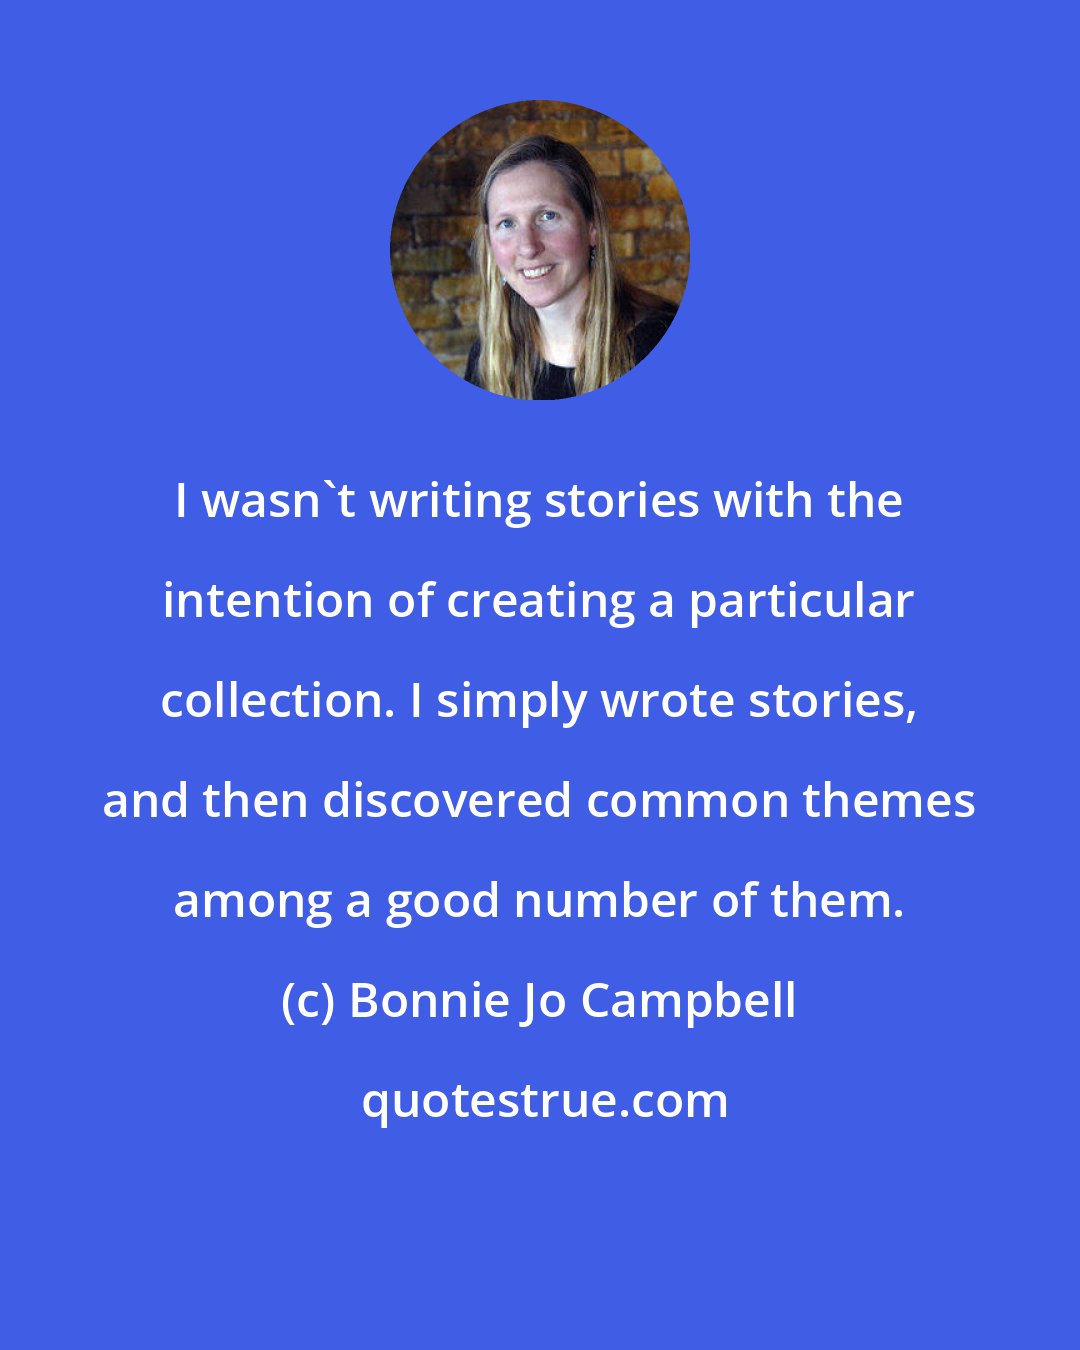 Bonnie Jo Campbell: I wasn't writing stories with the intention of creating a particular collection. I simply wrote stories, and then discovered common themes among a good number of them.